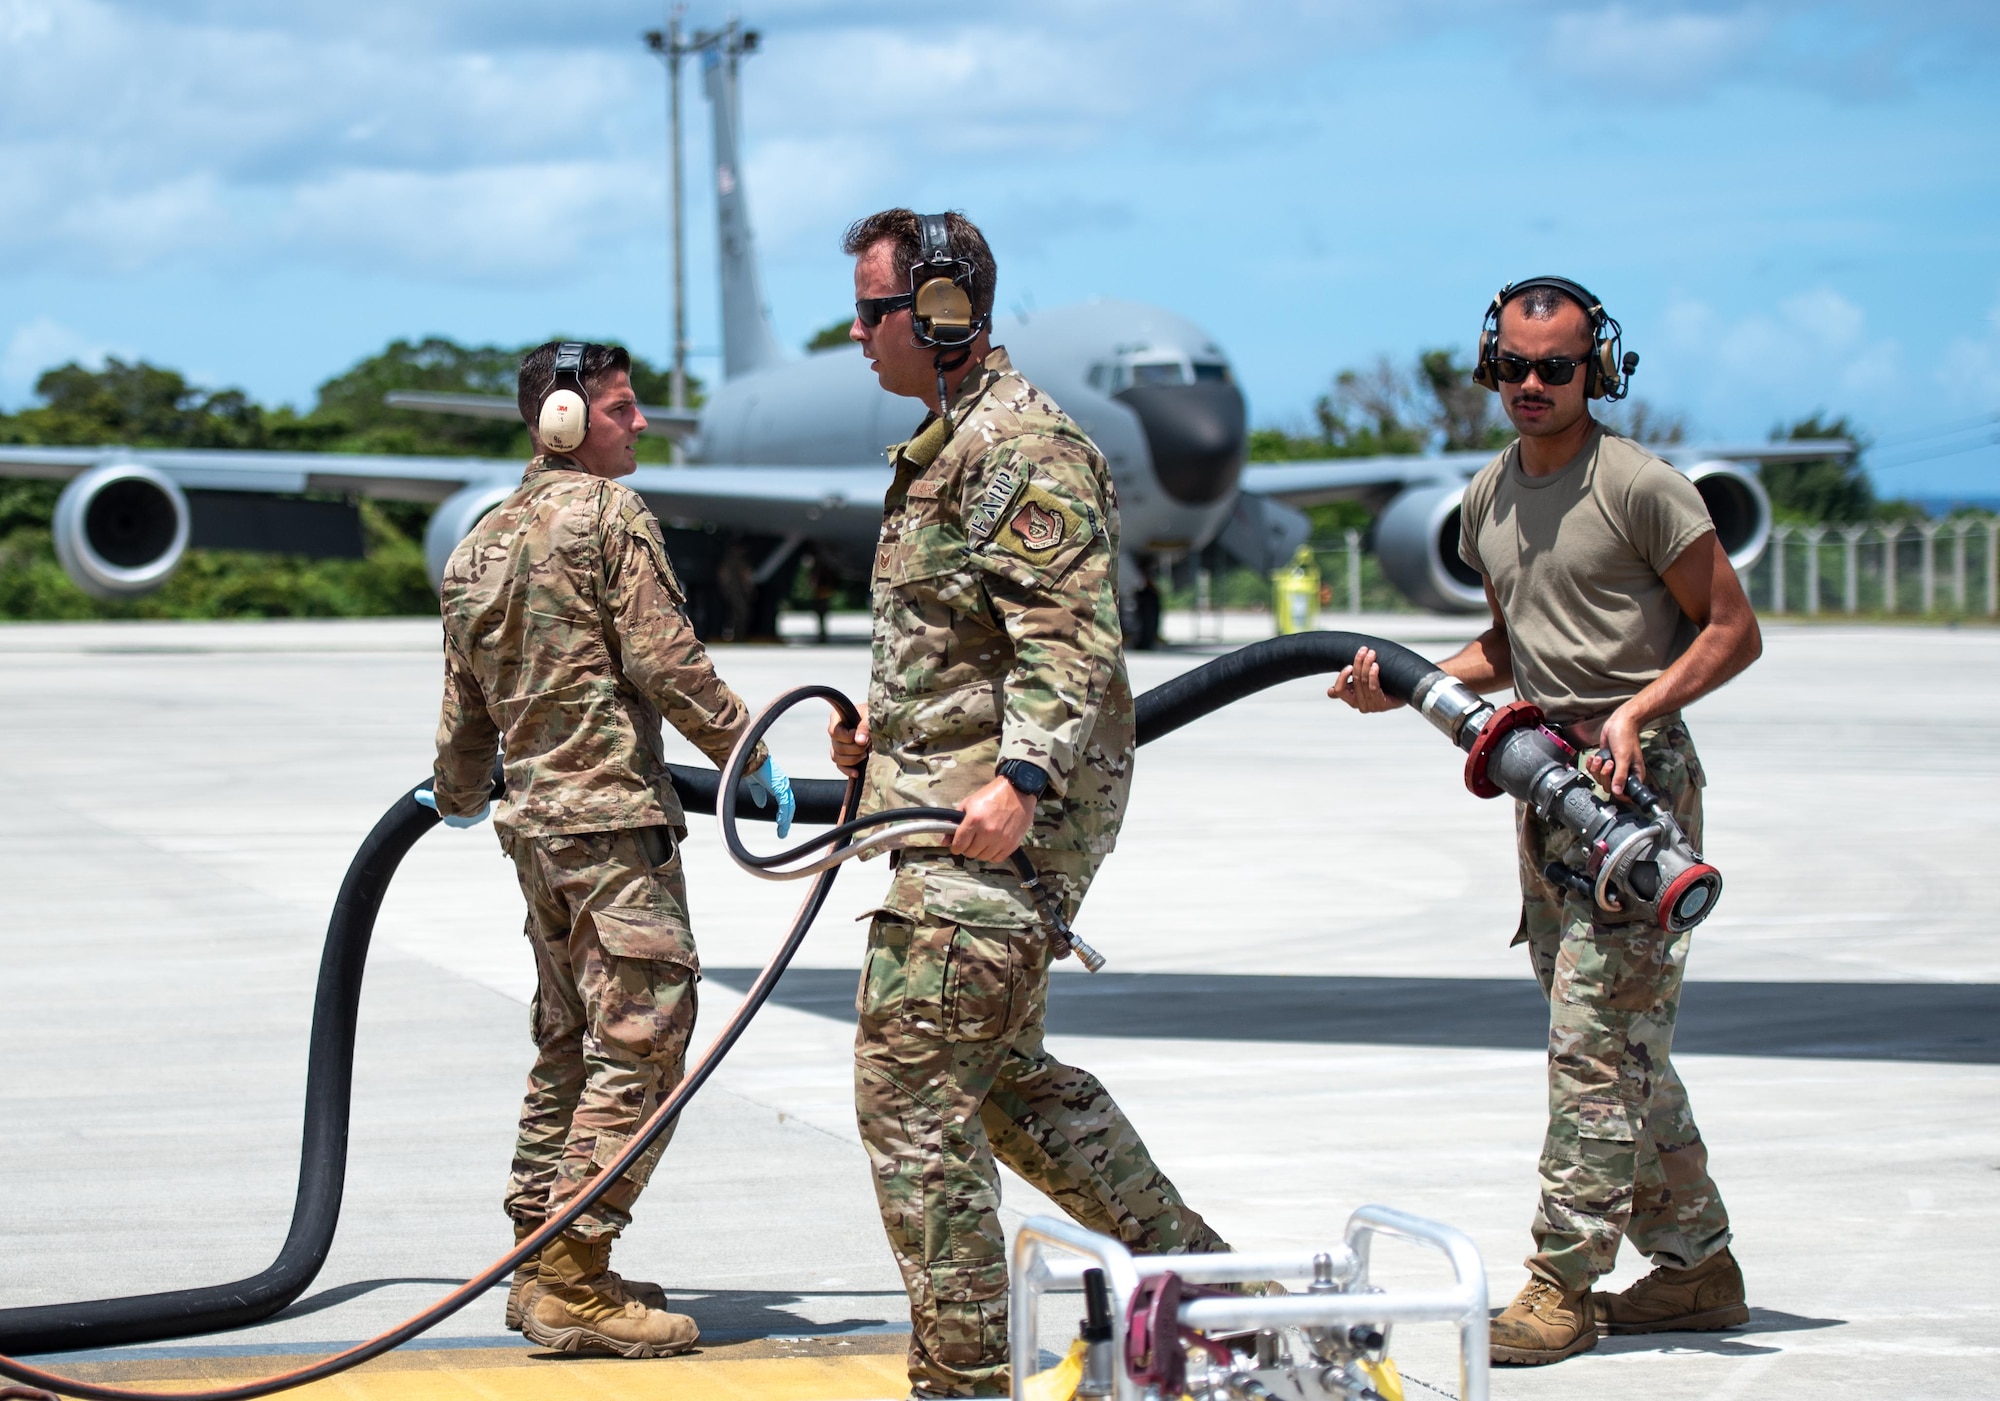 Airmen hold a fuel hose while performing hot-pit refueling